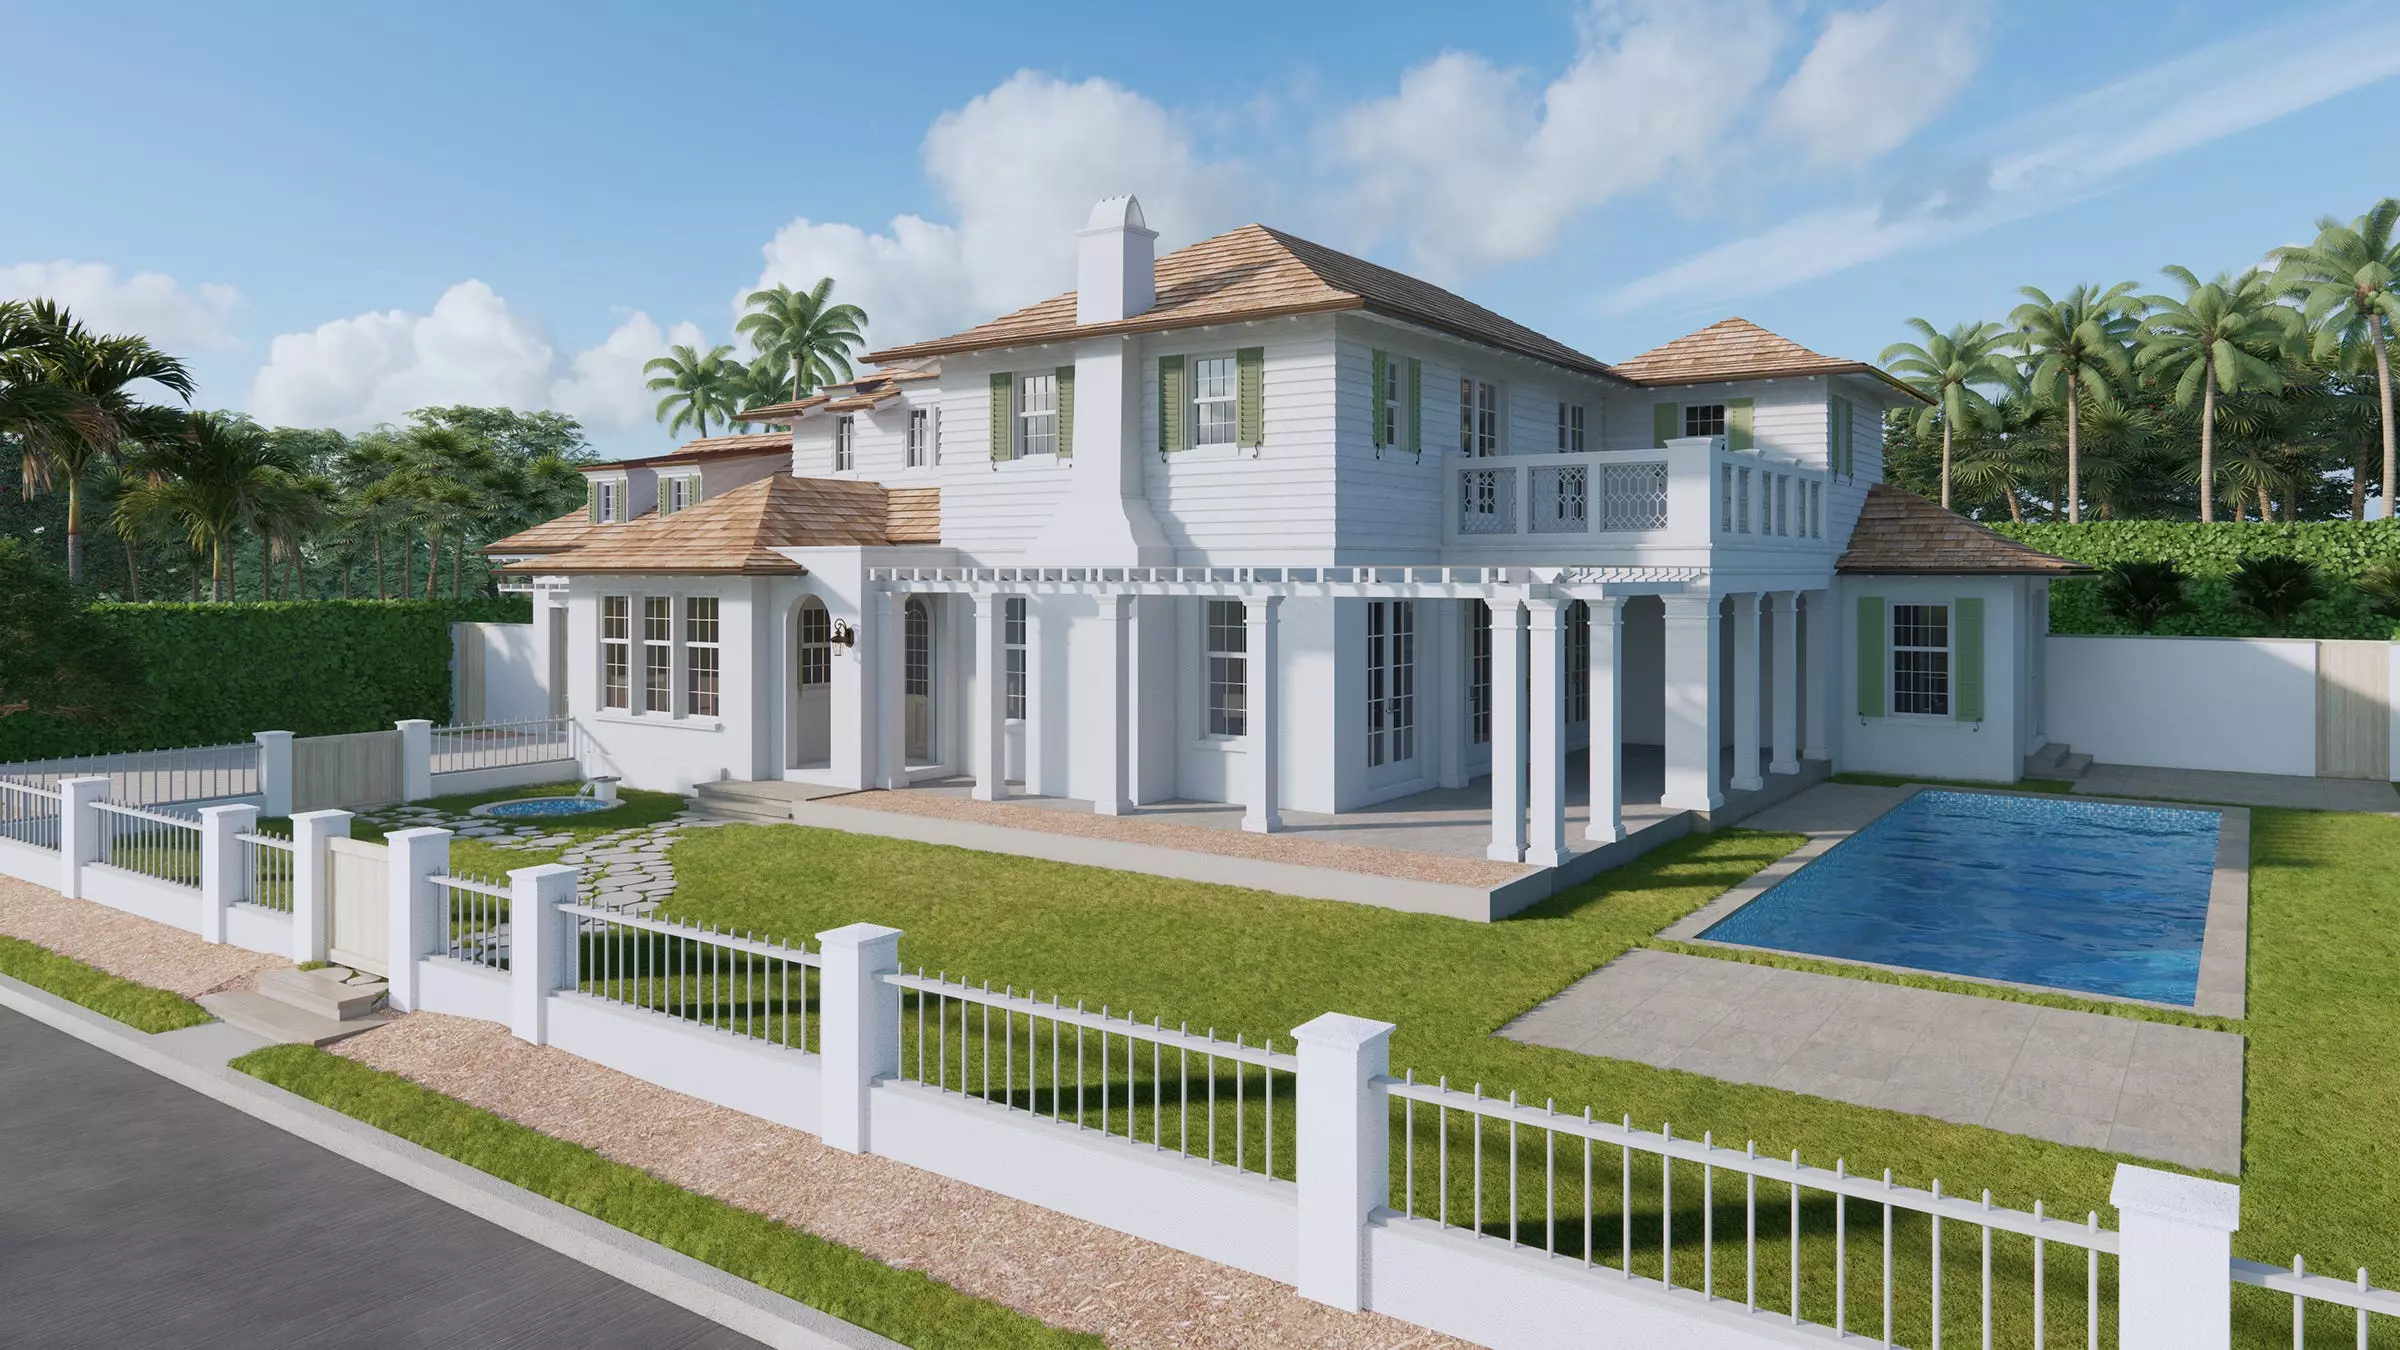 In September, the Palm Beach Architectural Commission asked for significant changes to the design of a house depicted in the top rendering for 217 Bahama Lane. The bottom rendering shows the revised design approved by the board in January.